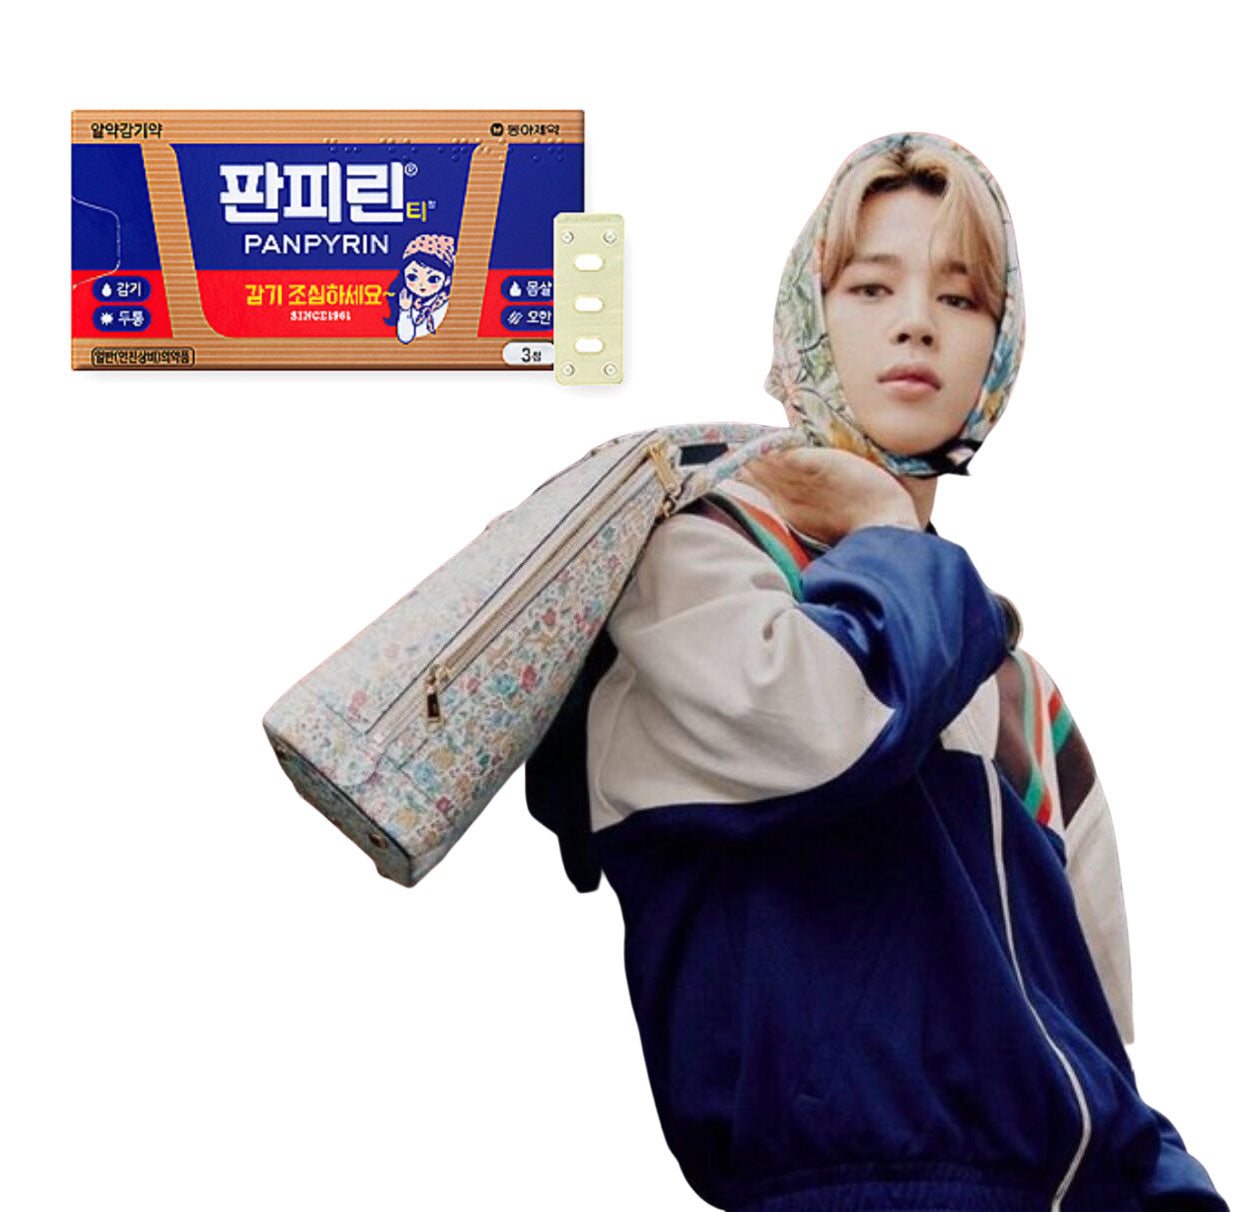 Dong-A Panpyrin-T Tablets Cough Medicine Cold Sick Headache Chills BTS Jimin ad Love Product Health Supplements Foods Korean Best Selling No.1 Products